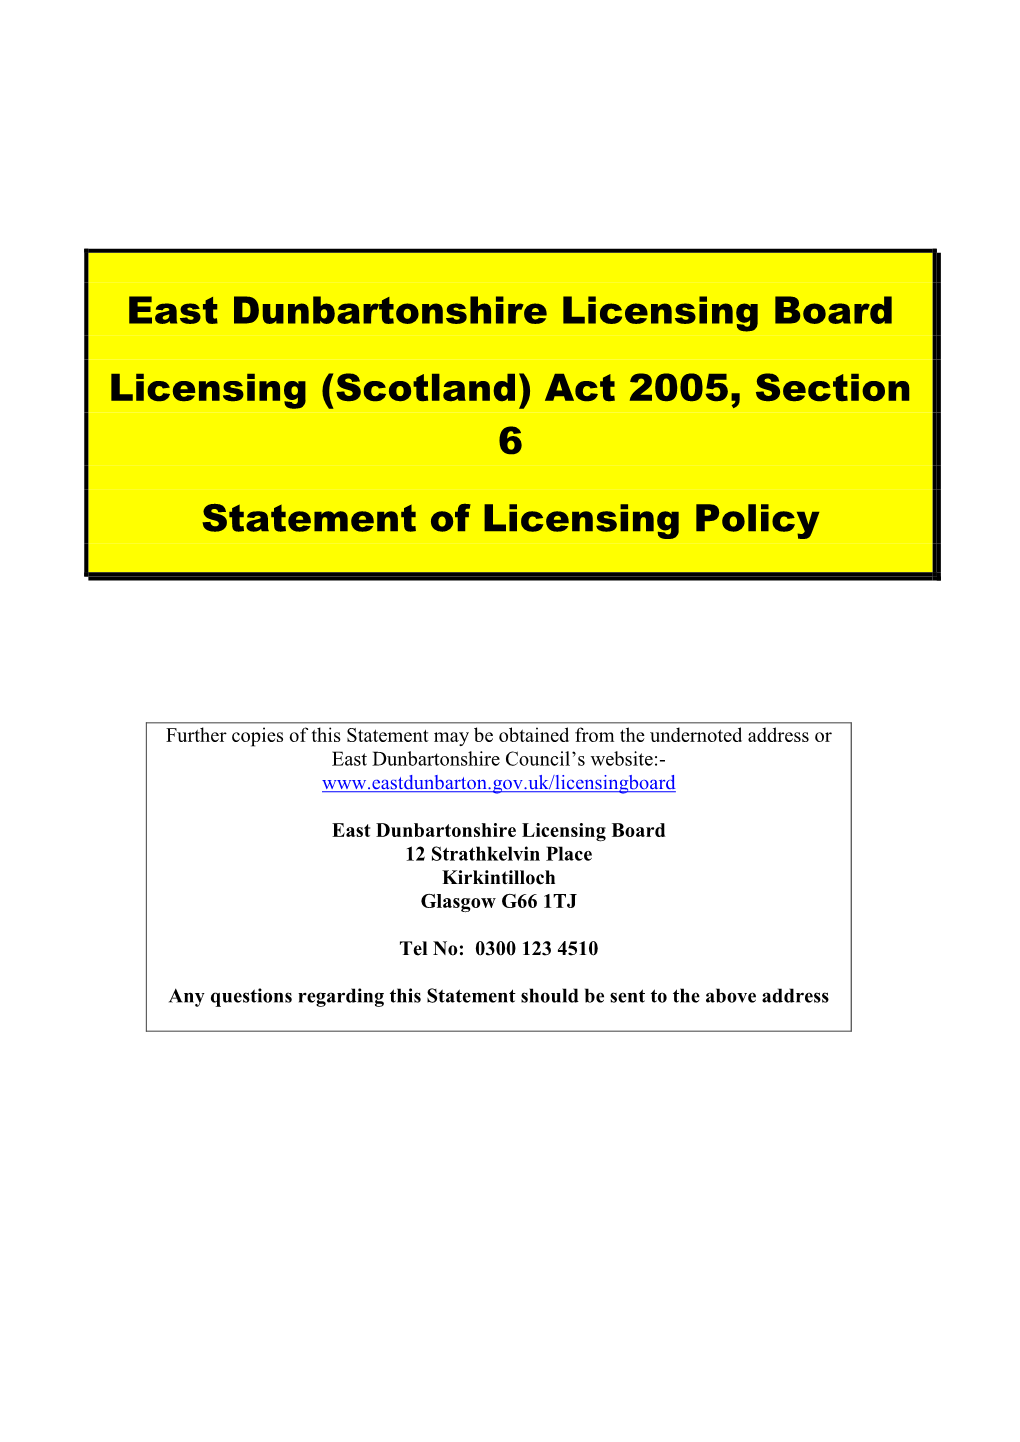 (Scotland) Act 2005, Section 6 Statement of Licensing Policy